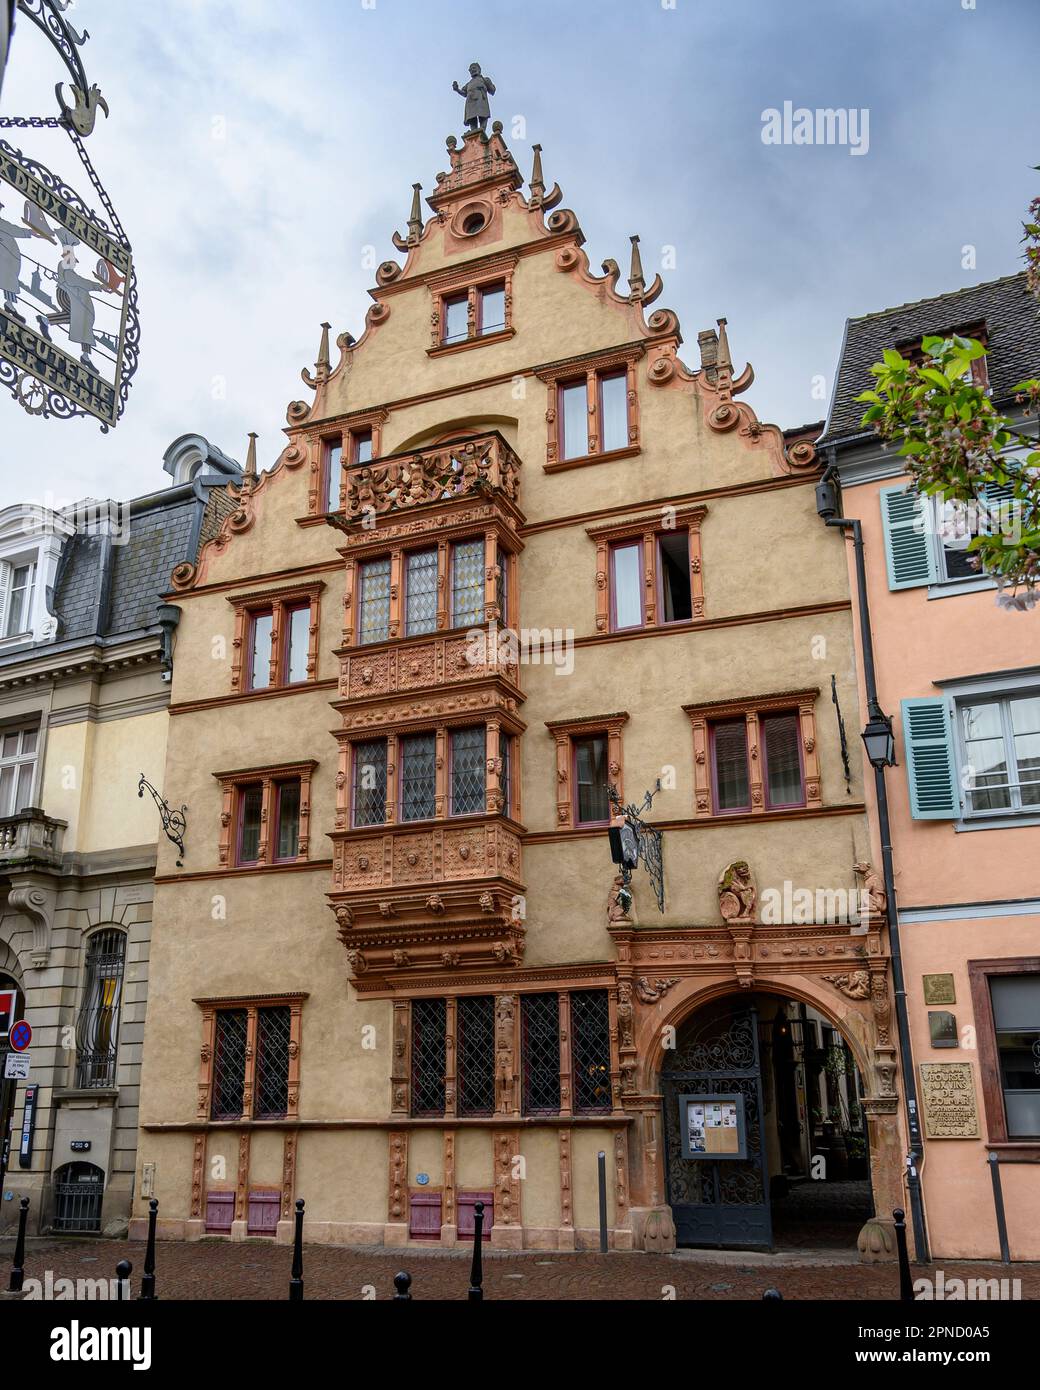 The House of 100 Faces in Colmar, France. The owner, a barrel maker, had the faces of 100 of his drinking friends carved into the stonework. Stock Photo